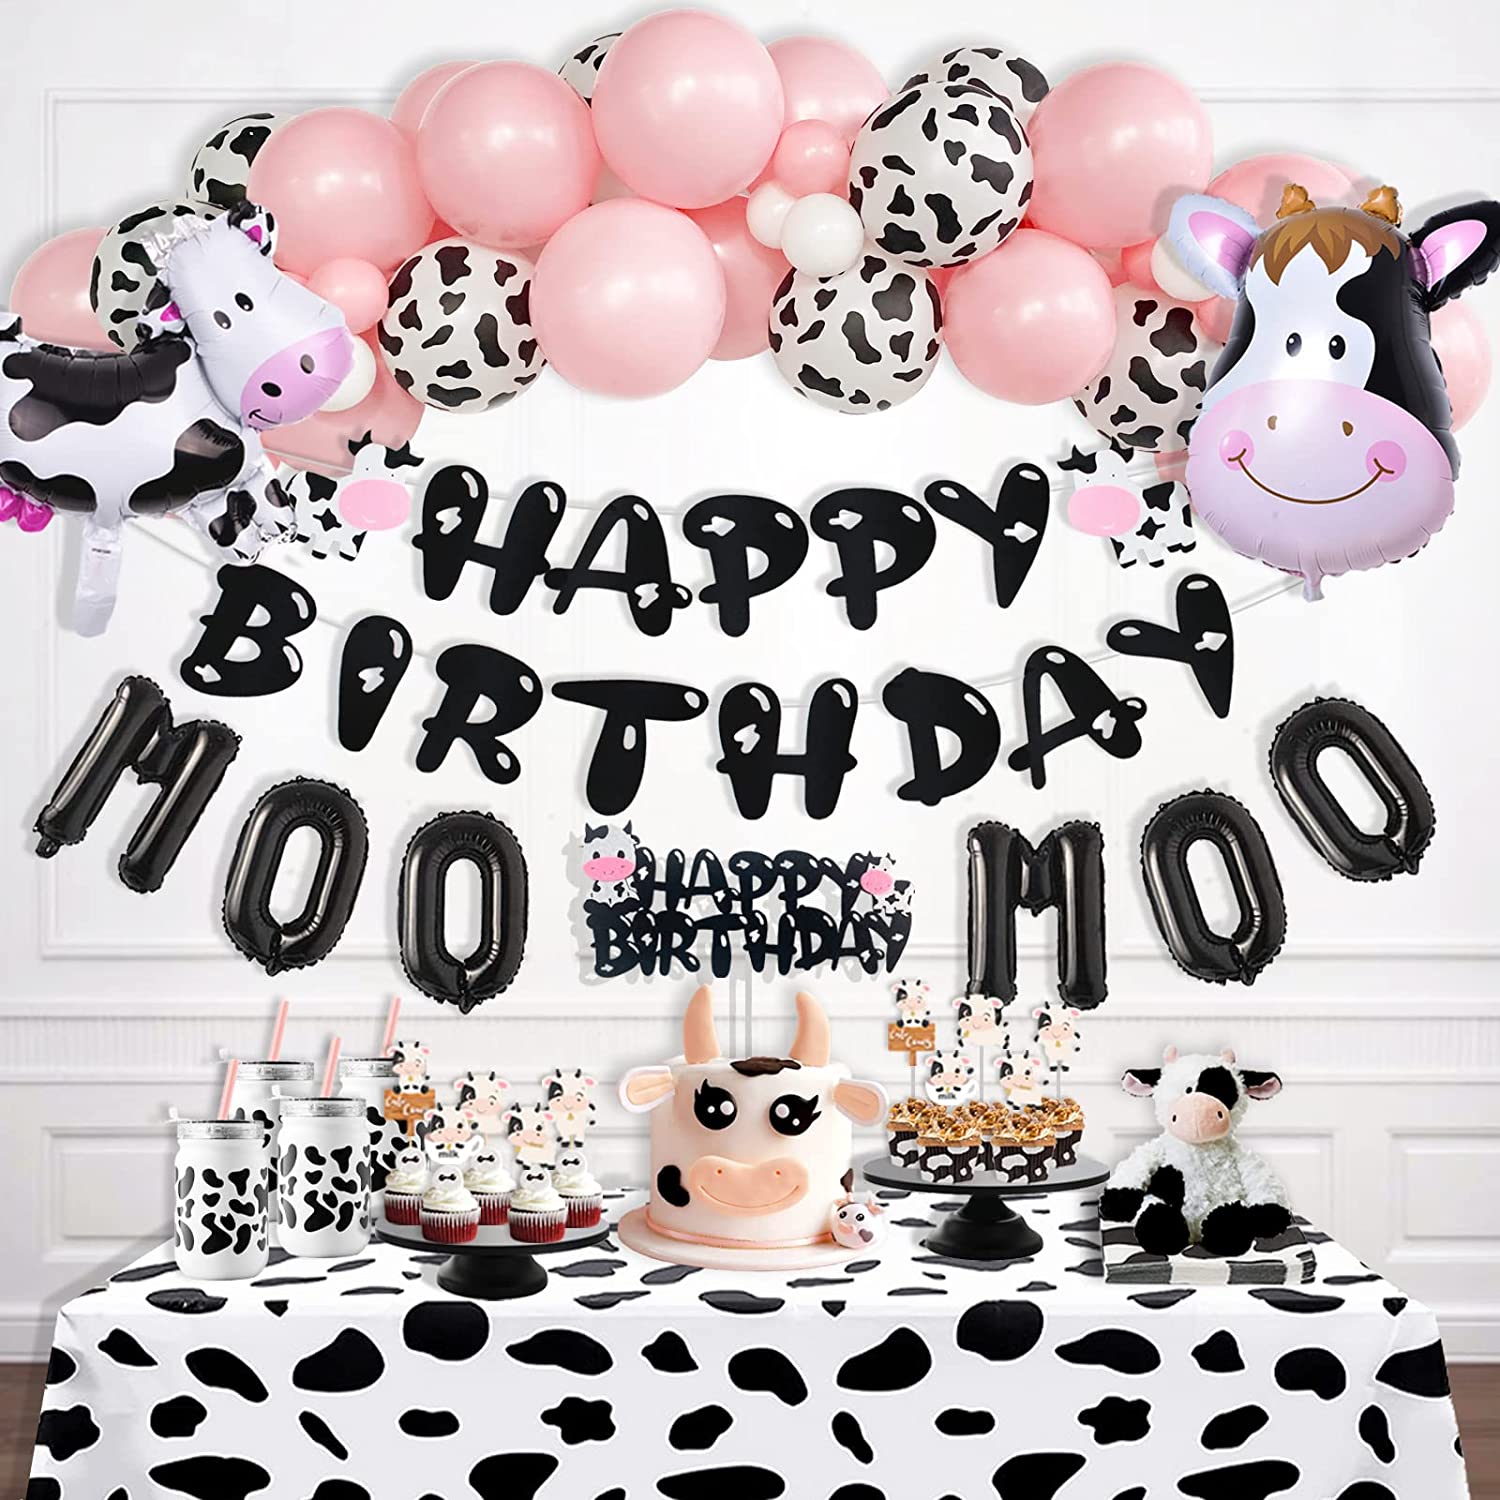 Moo-ve Over: Cow-themed Parties Are Trending